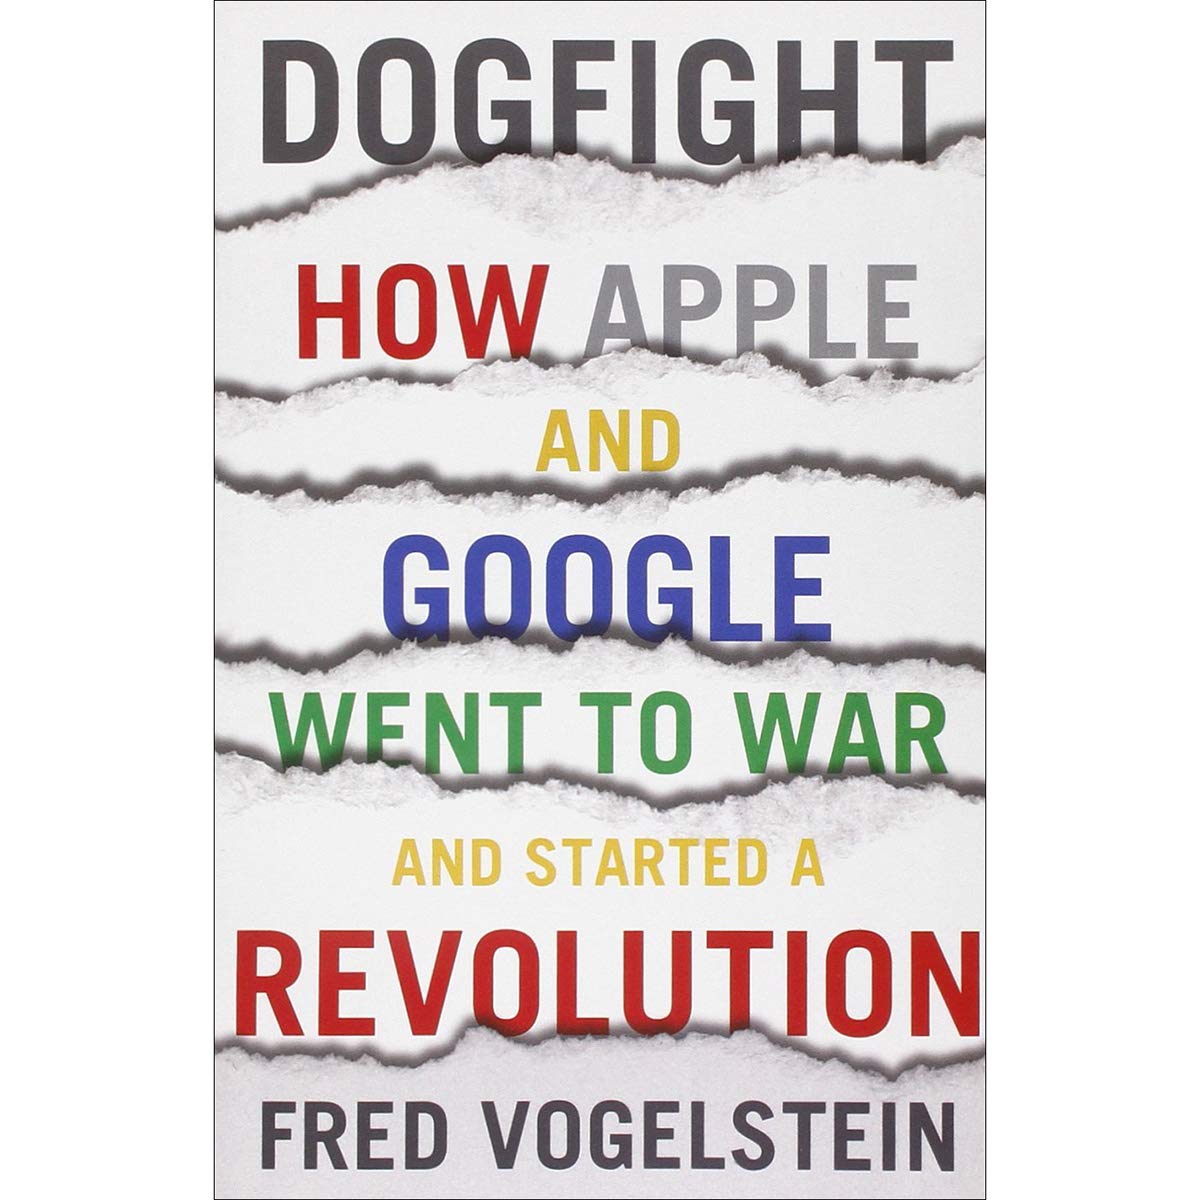 Dogfight: How Apple and Google Went to War and Started a Revolution by Fred Vogelstein